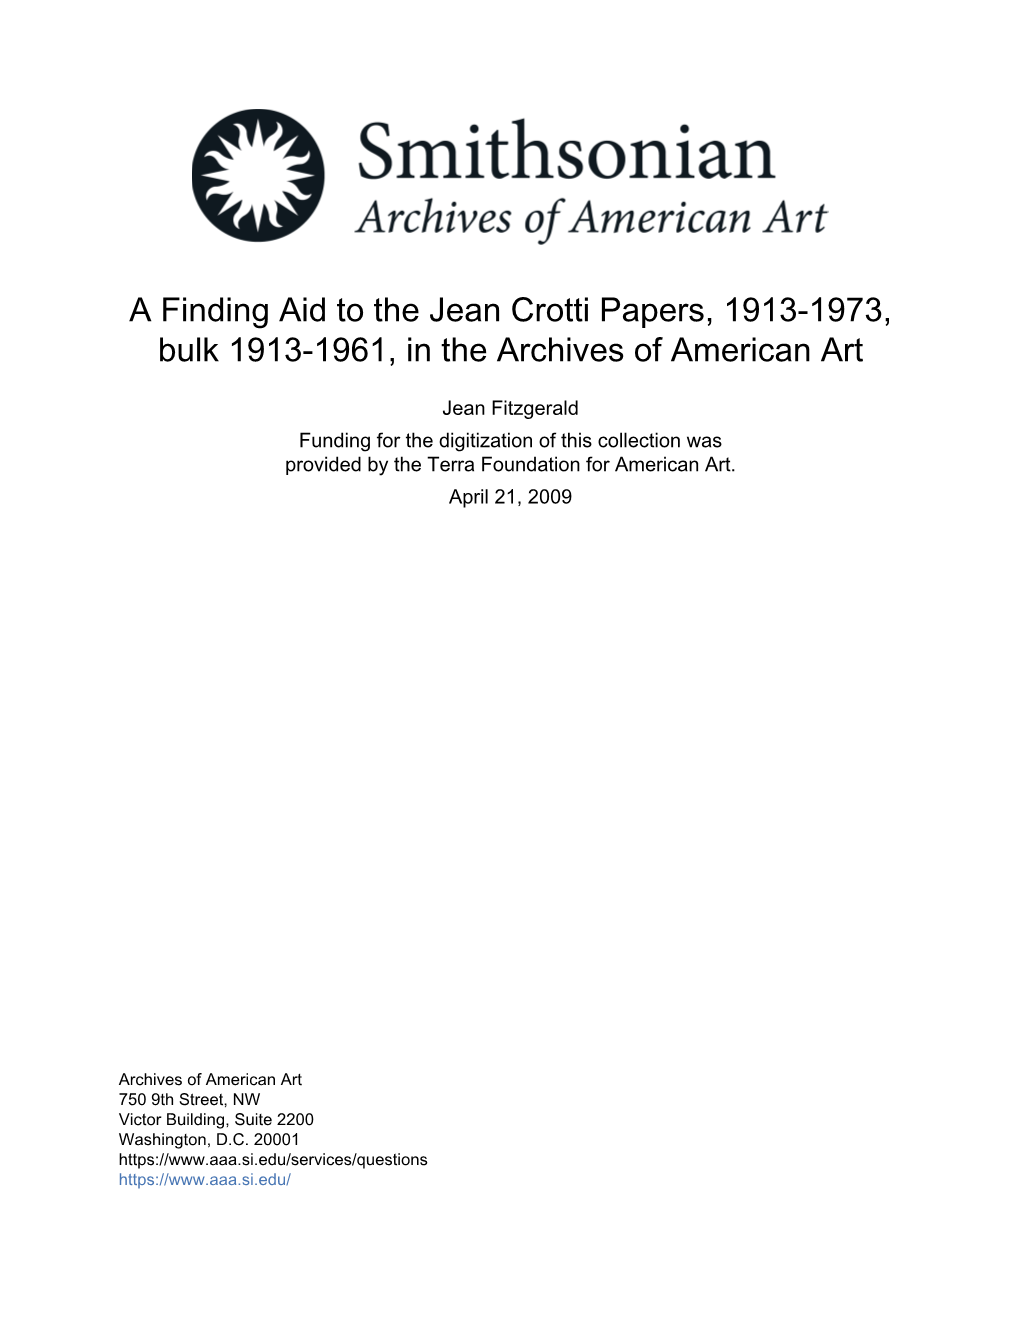 A Finding Aid to the Jean Crotti Papers, 1913-1973, Bulk 1913-1961, in the Archives of American Art